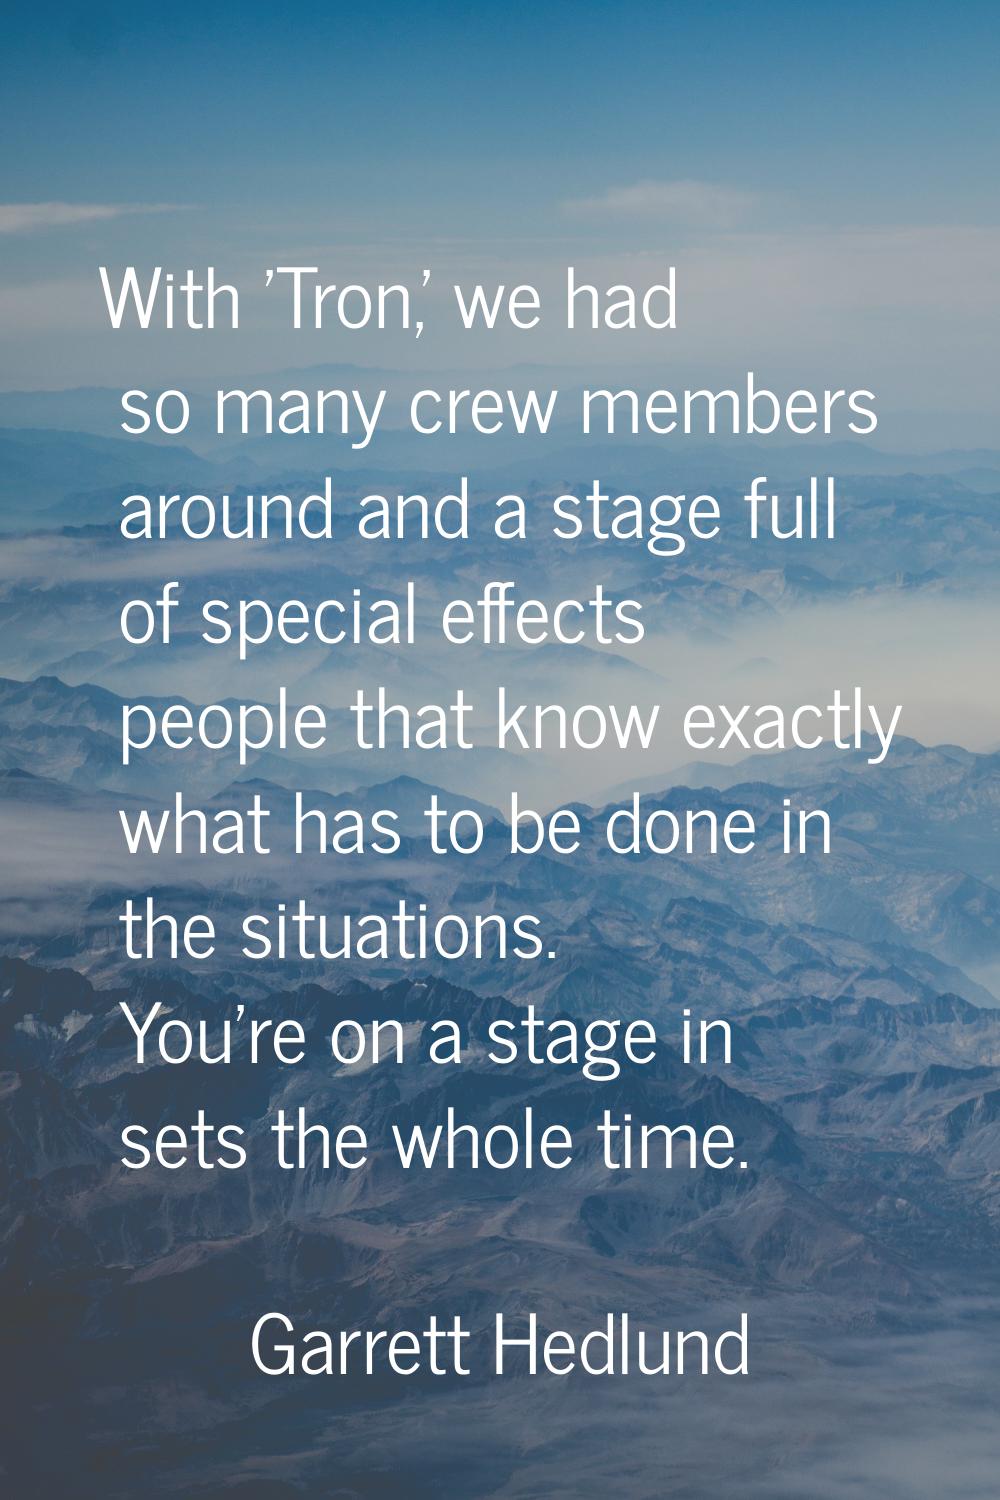 With 'Tron,' we had so many crew members around and a stage full of special effects people that kno